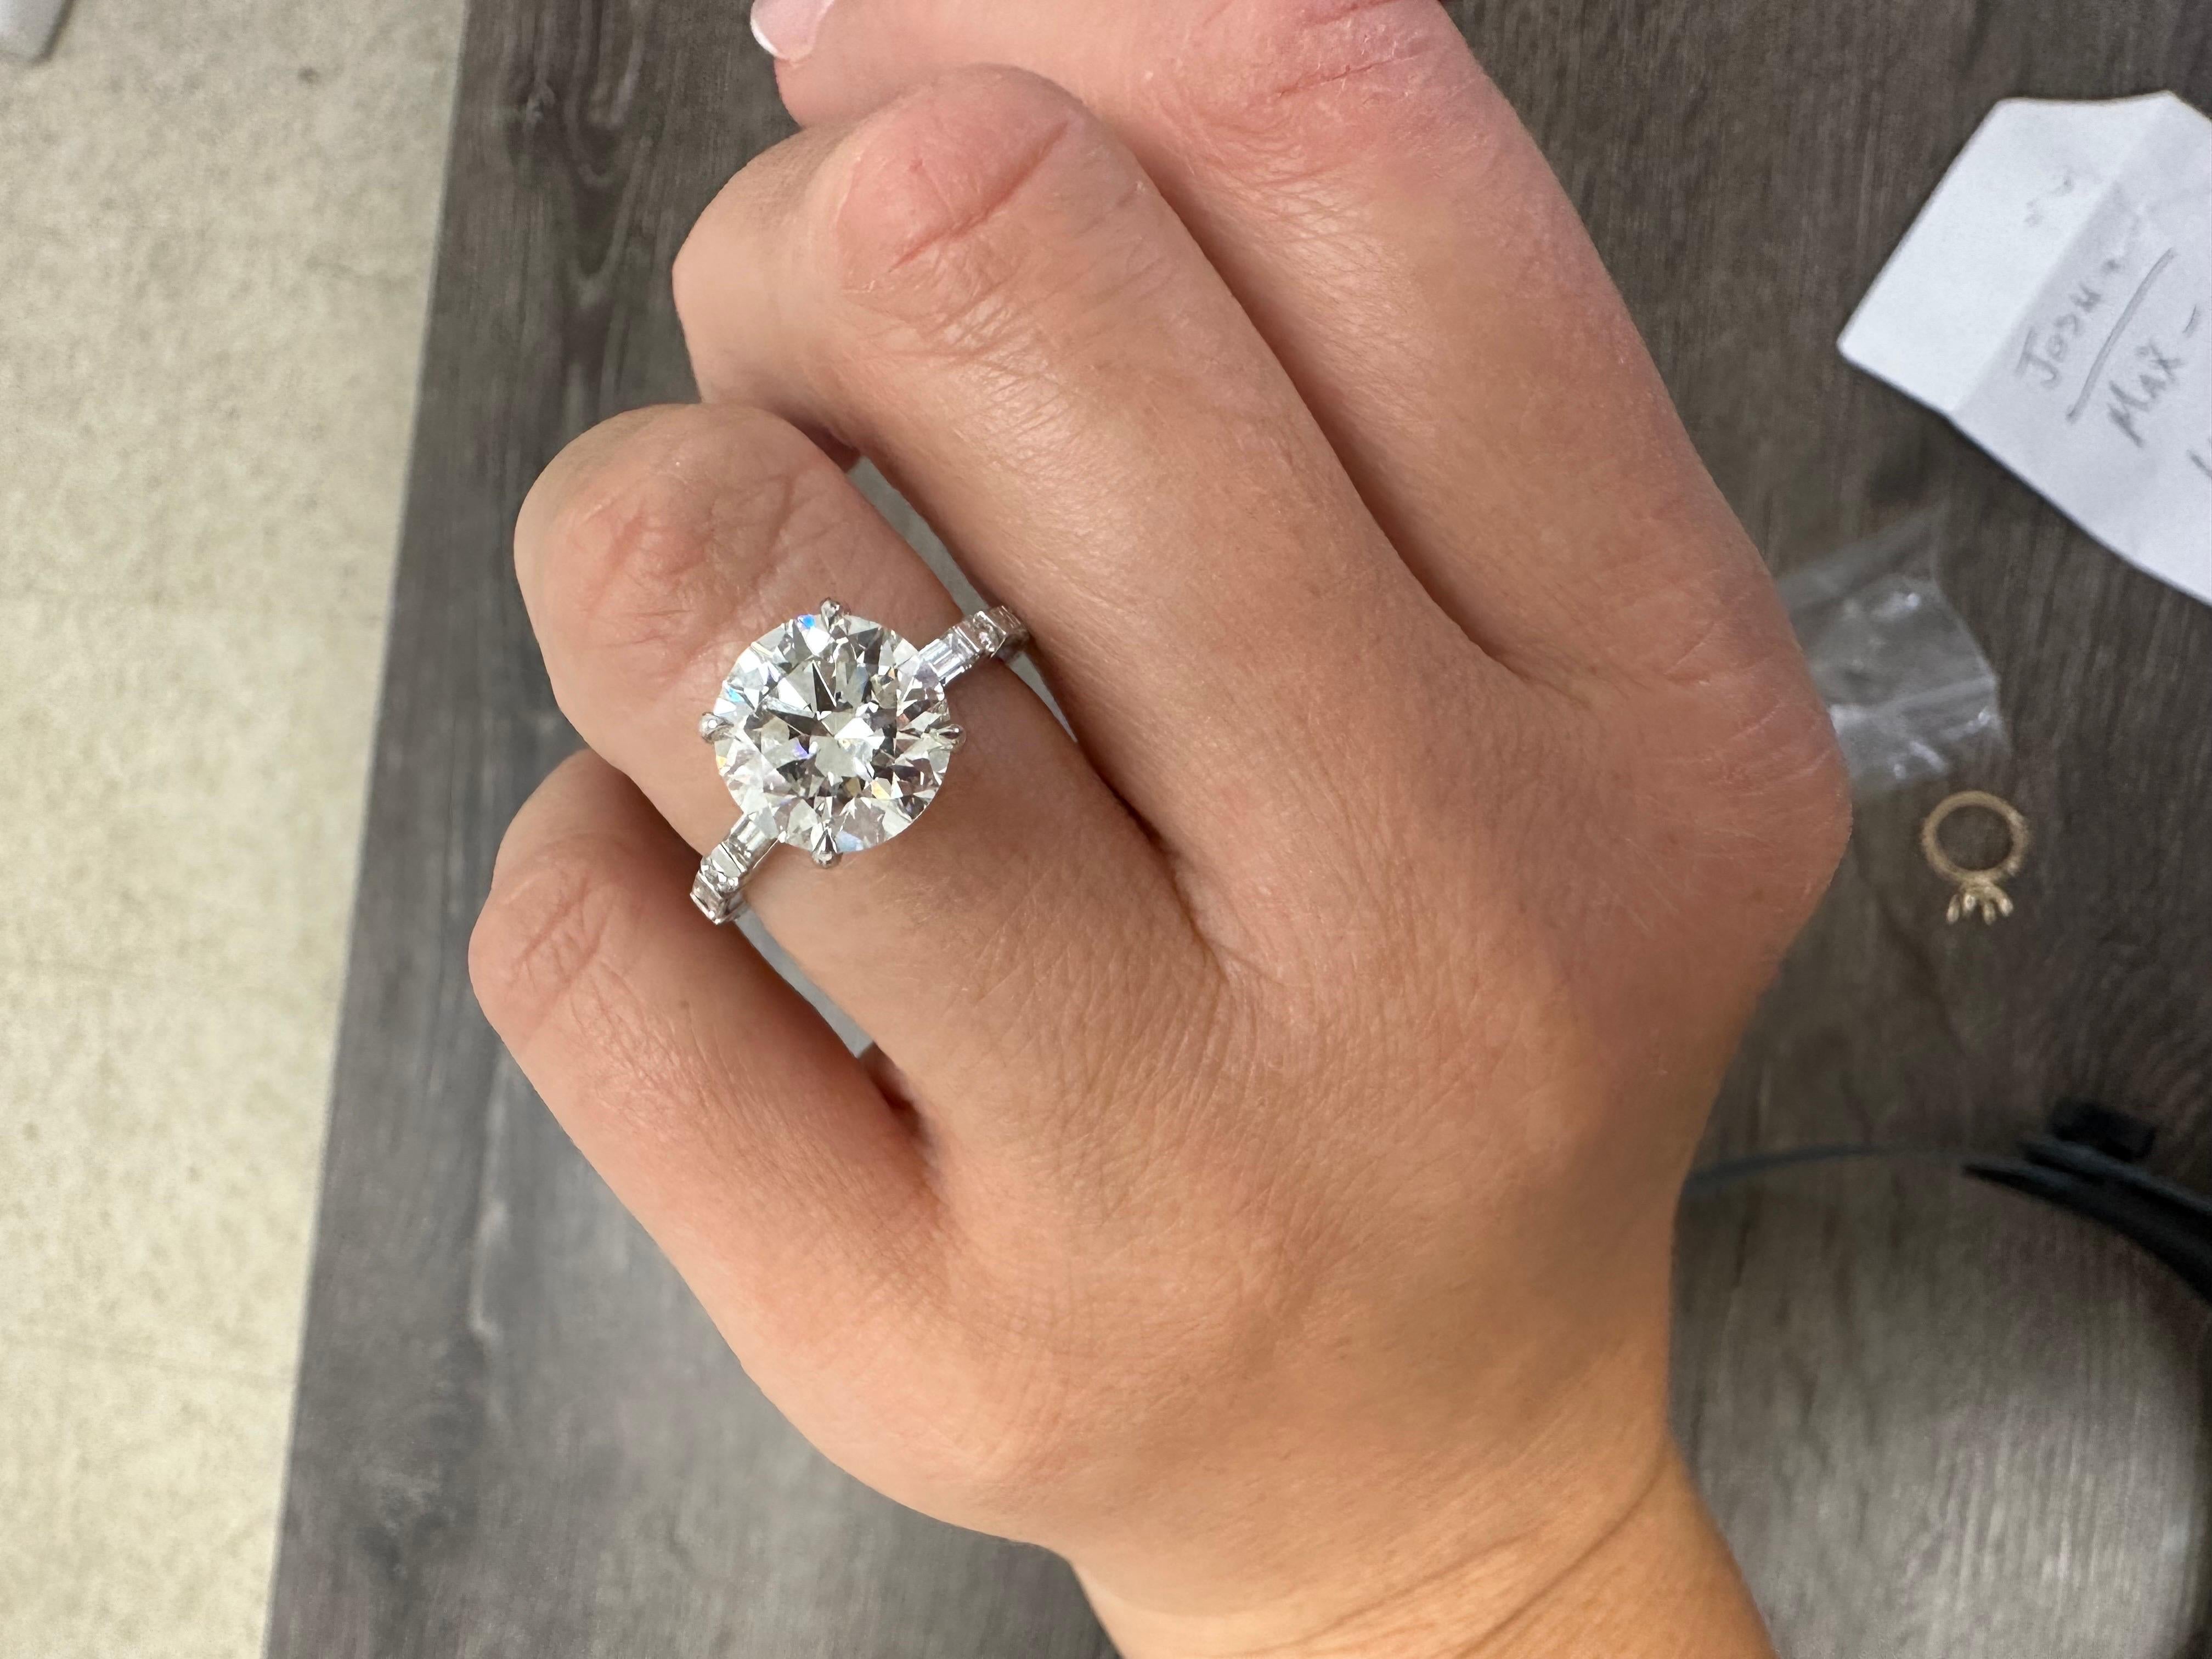 Stunning 4 carats moissanite center surrounded by natural diamond on the shank set half way down. The ringf is made in 18KT gold and is a size 6. The ring can be re-sized. Diamonds are Si clarity and G color, moissanite is VVS1 clarity and F